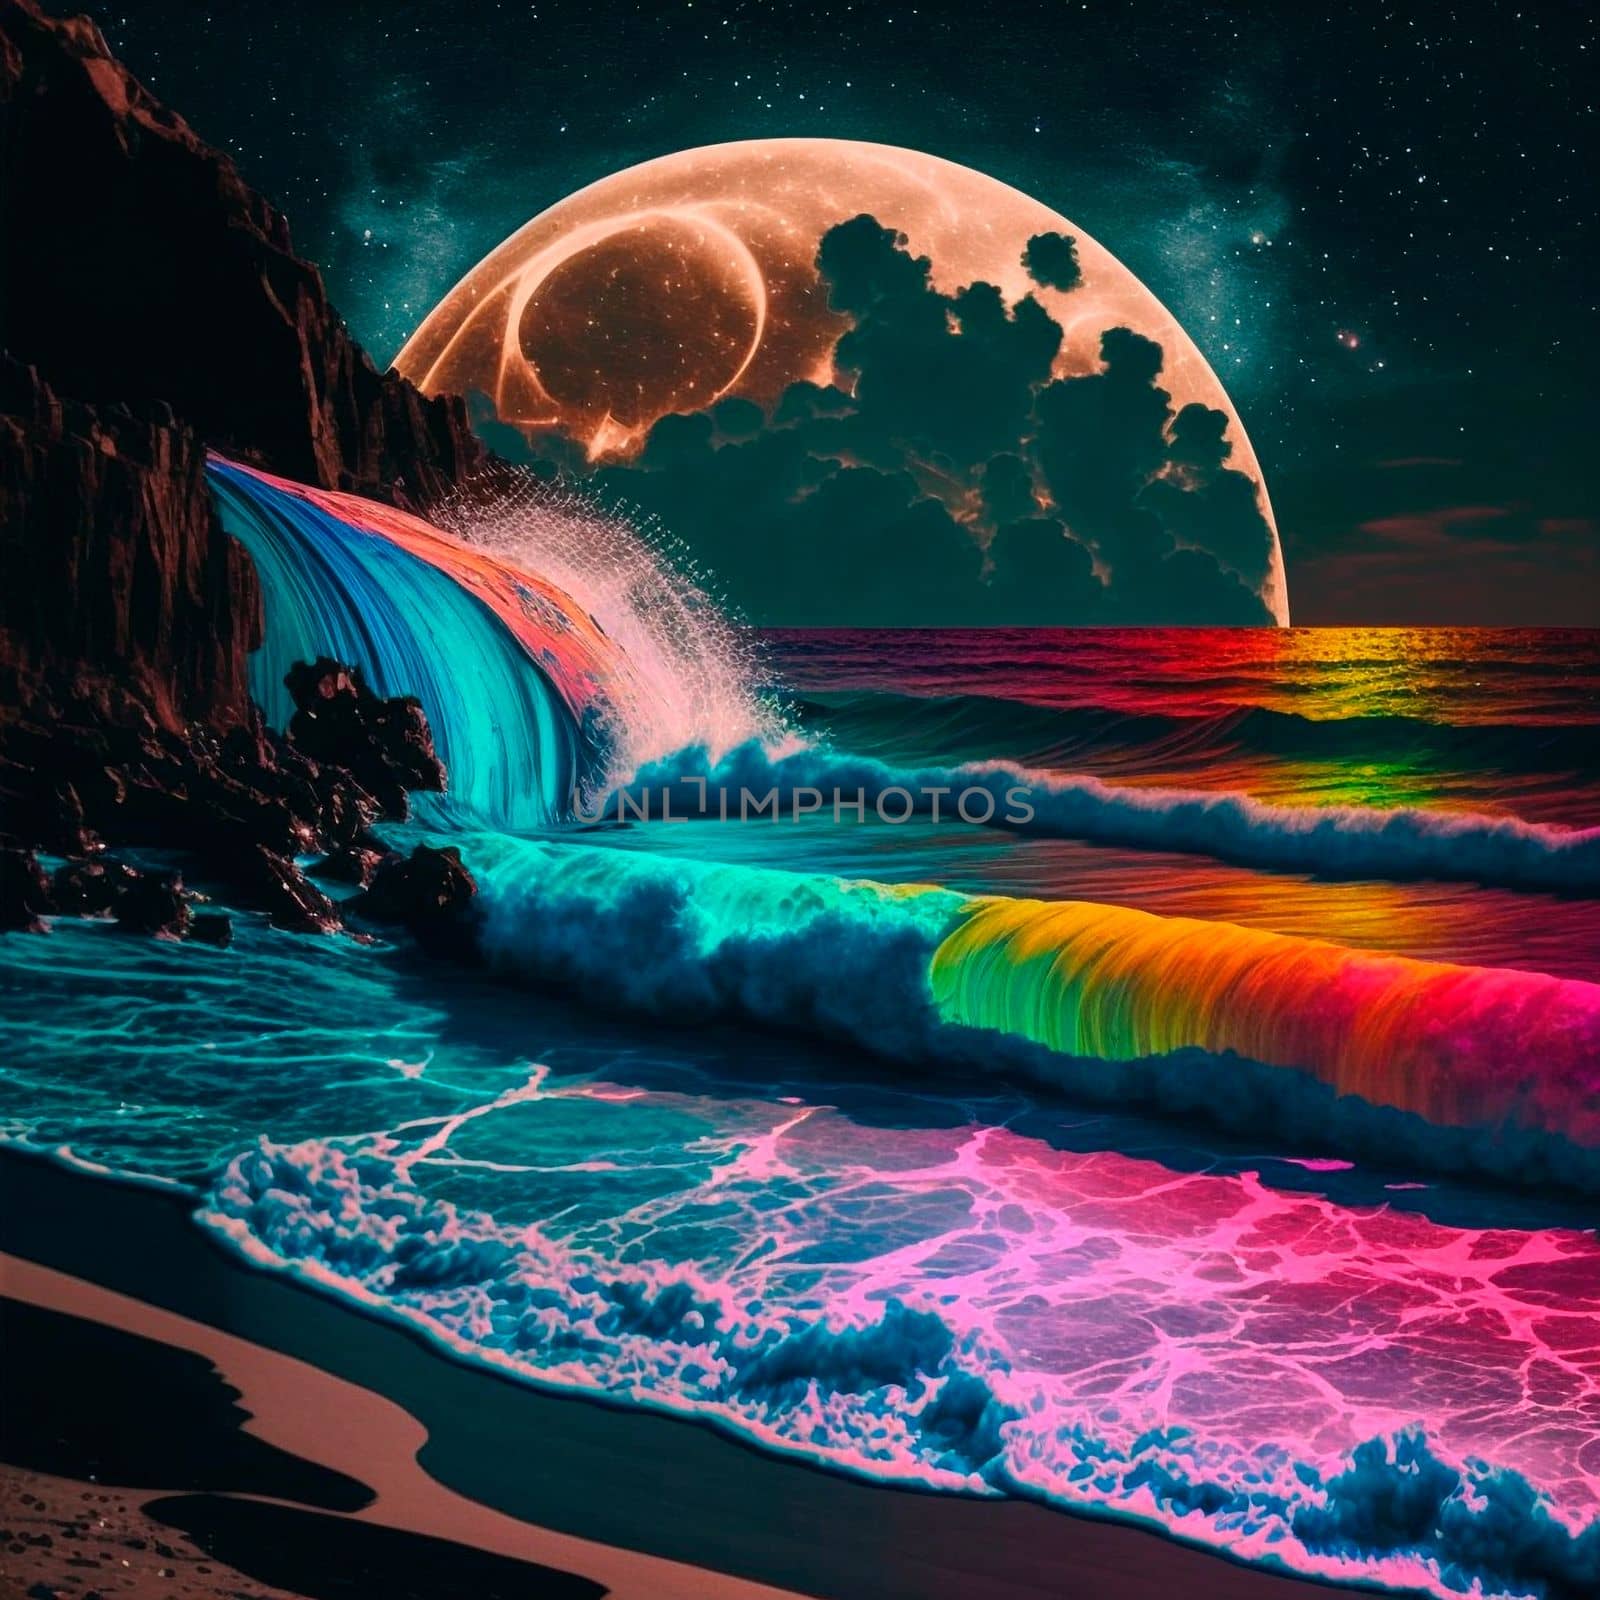 night beach with beautiful iridescent waves of different colors. High quality illustration